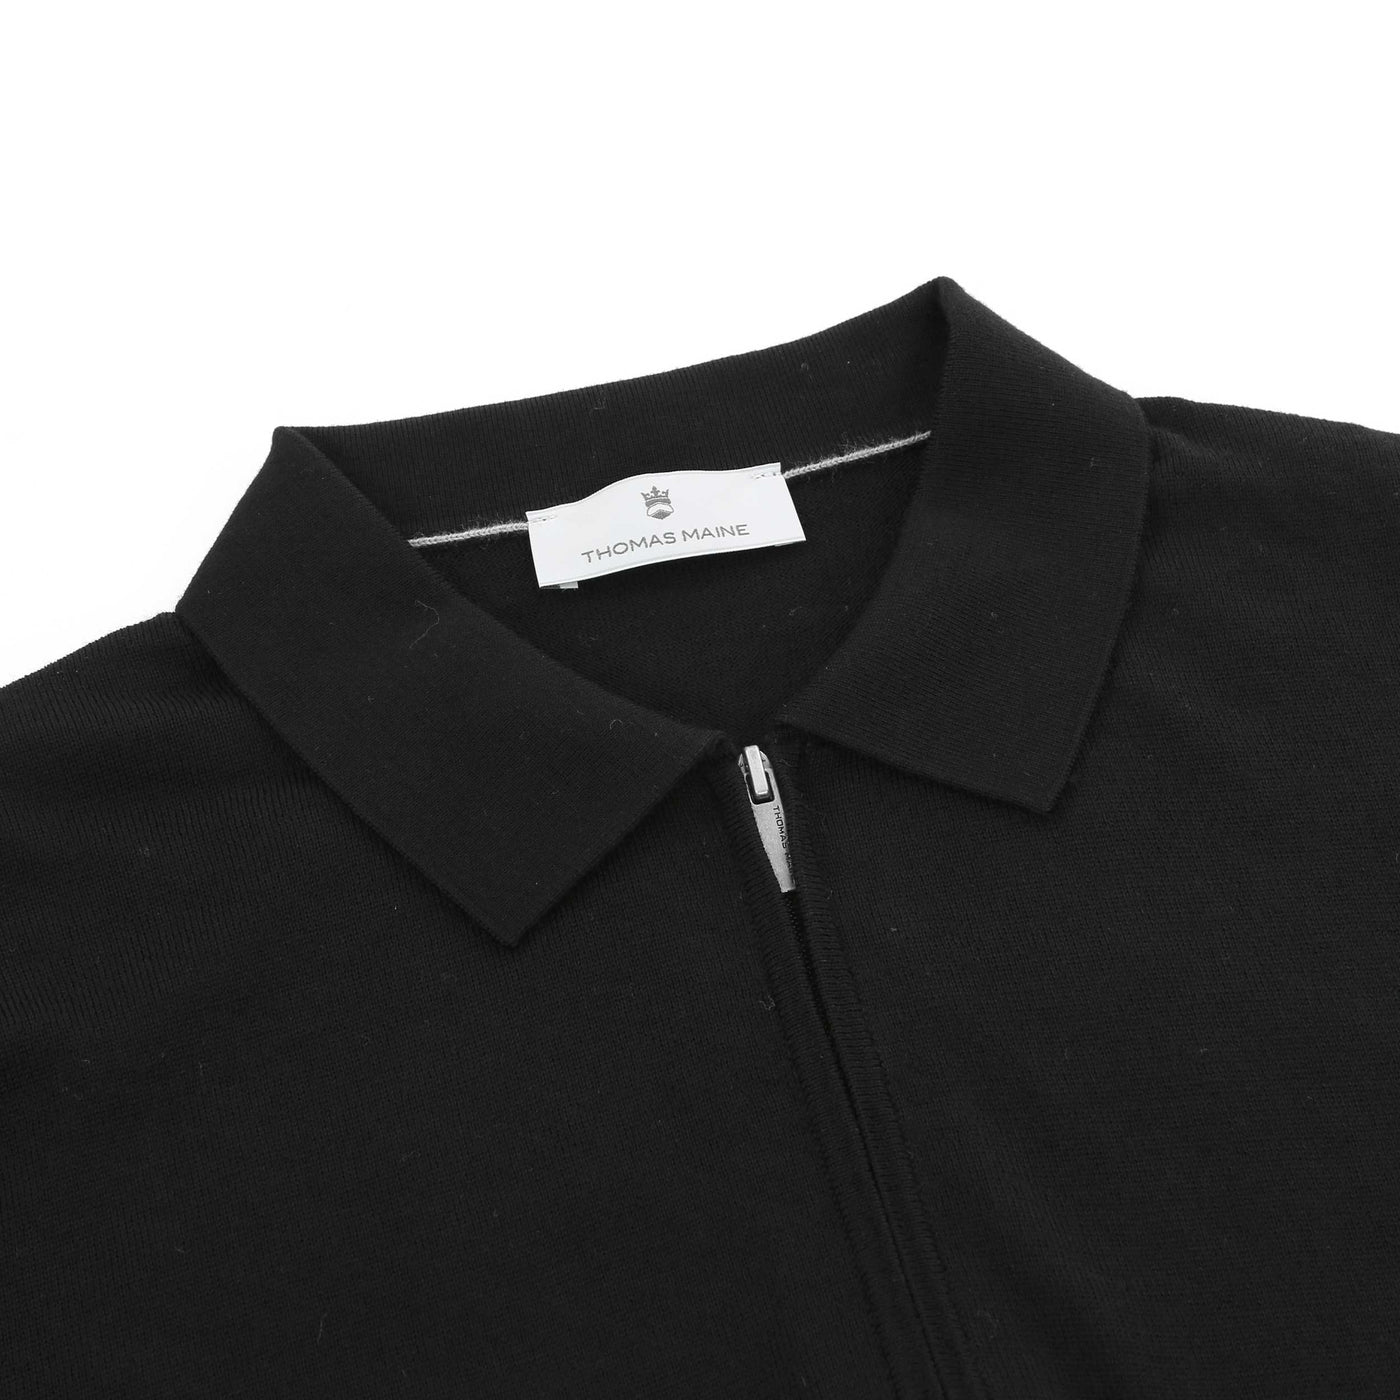 Thomas Maine Zip Knit Polo in Black Placket